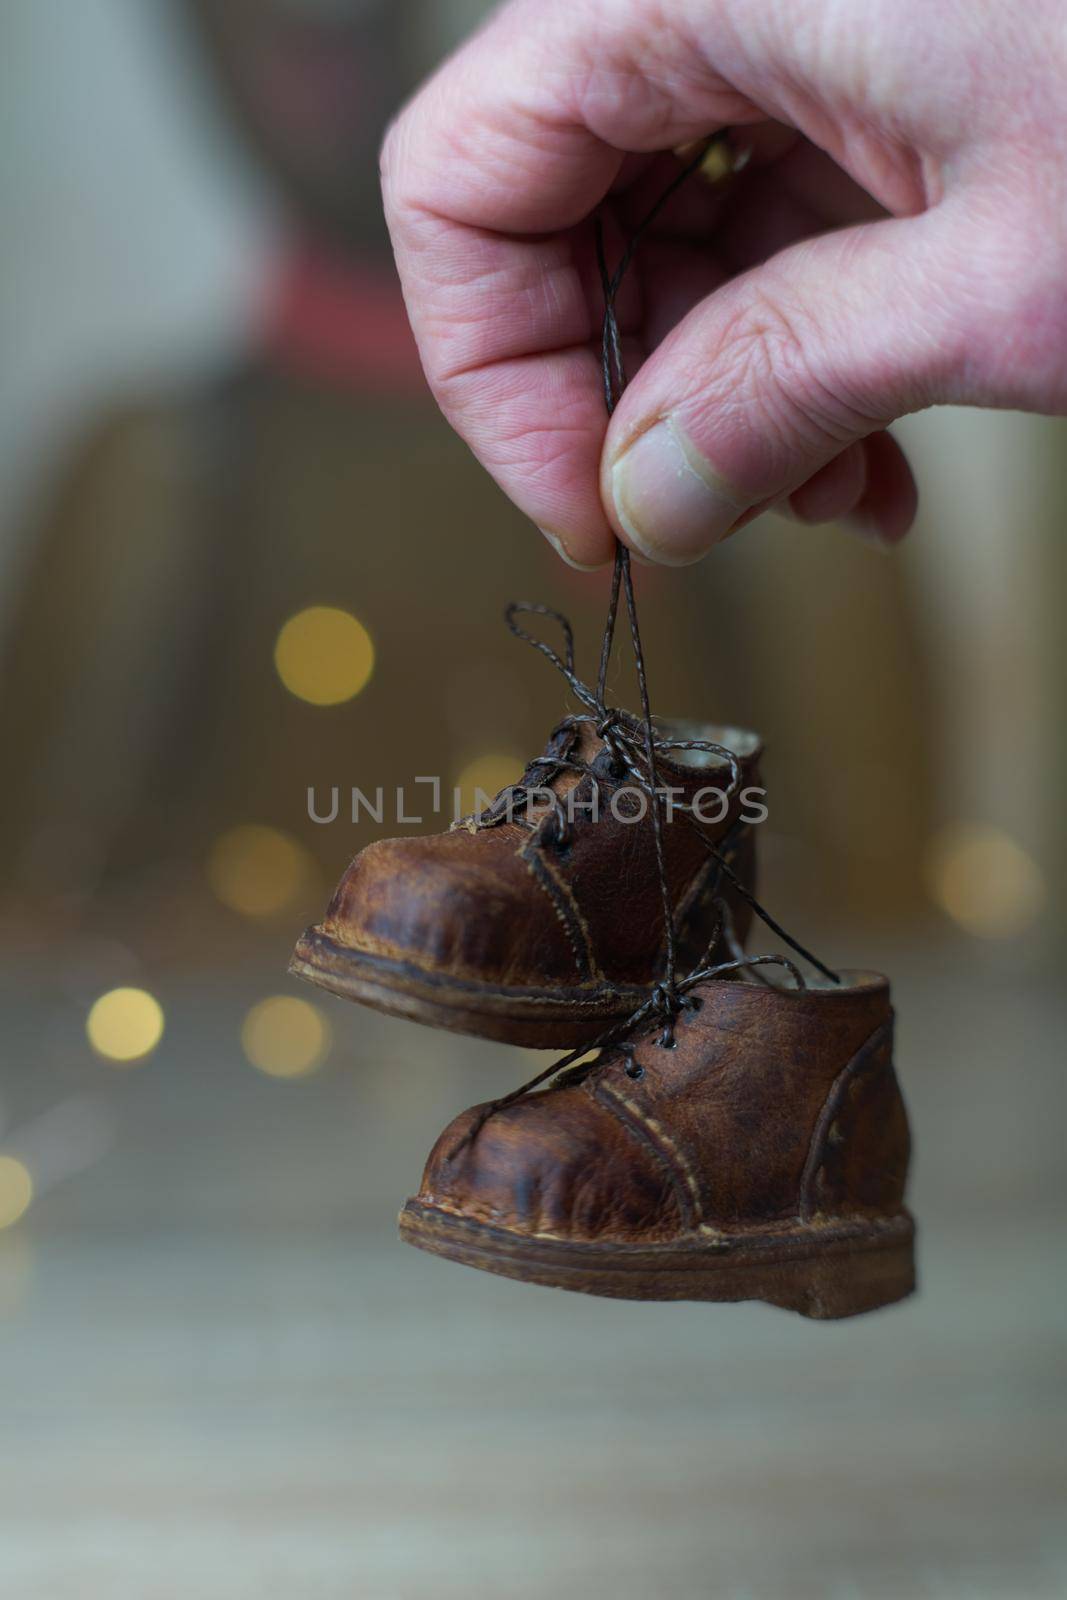 the concept of light industry for the manufacture of stylish fashionable brown leather small shoes with small feet for teddy bears or dolls and for children and their parents by Costin